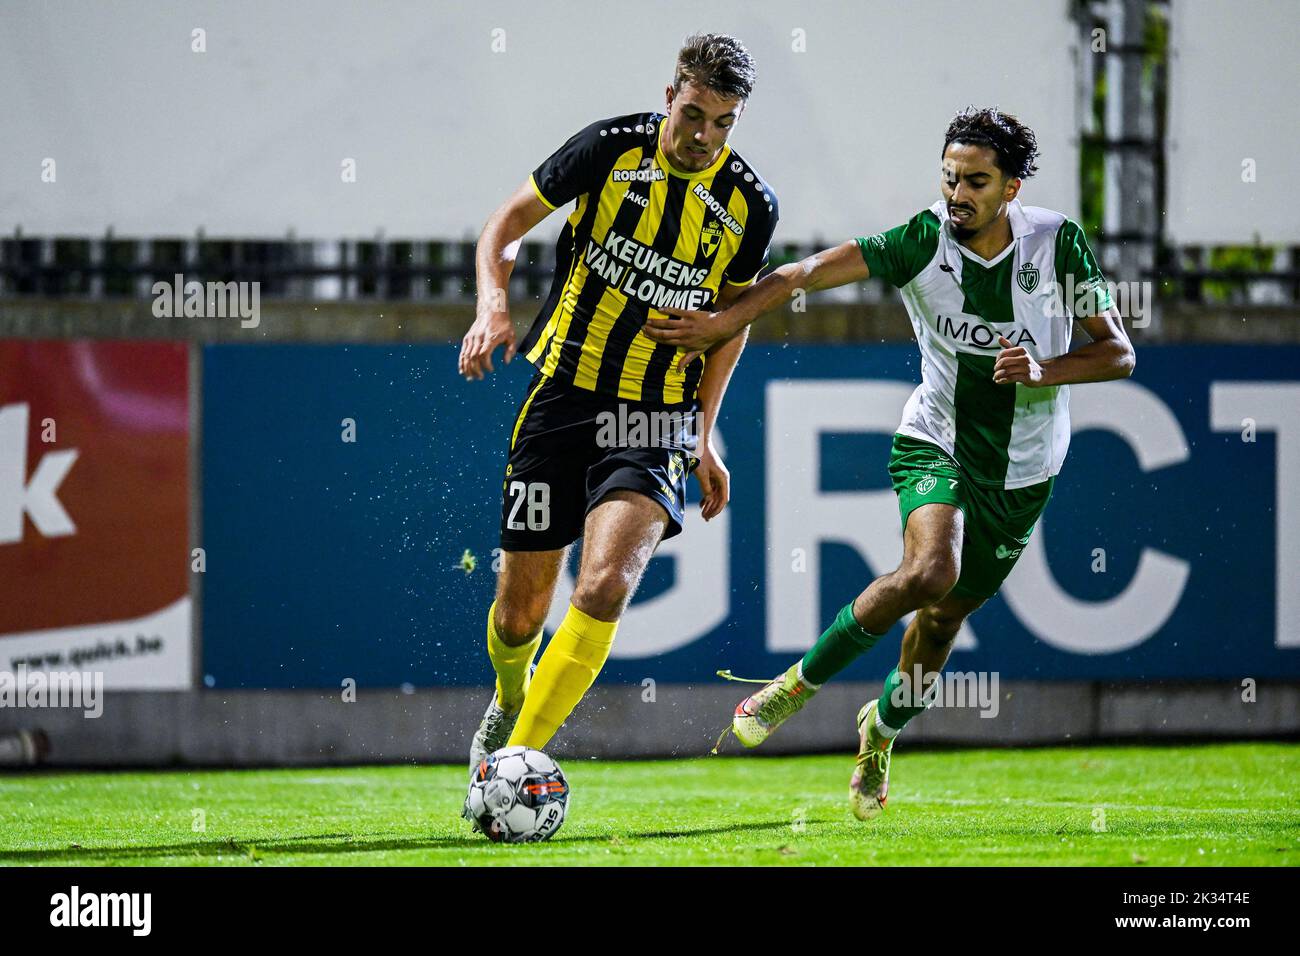 Lierse's Toon Raemaekers and Racing's Yanis Mrani pictured in action during a soccer game between Lierse Kempenzonen and Koninklijke Racing Club Mechelen, Saturday 24 September 2022 in Lier, in the fifth round of the 'Croky Cup' Belgian cup. BELGA PHOTO TOM GOYVAERTS Stock Photo